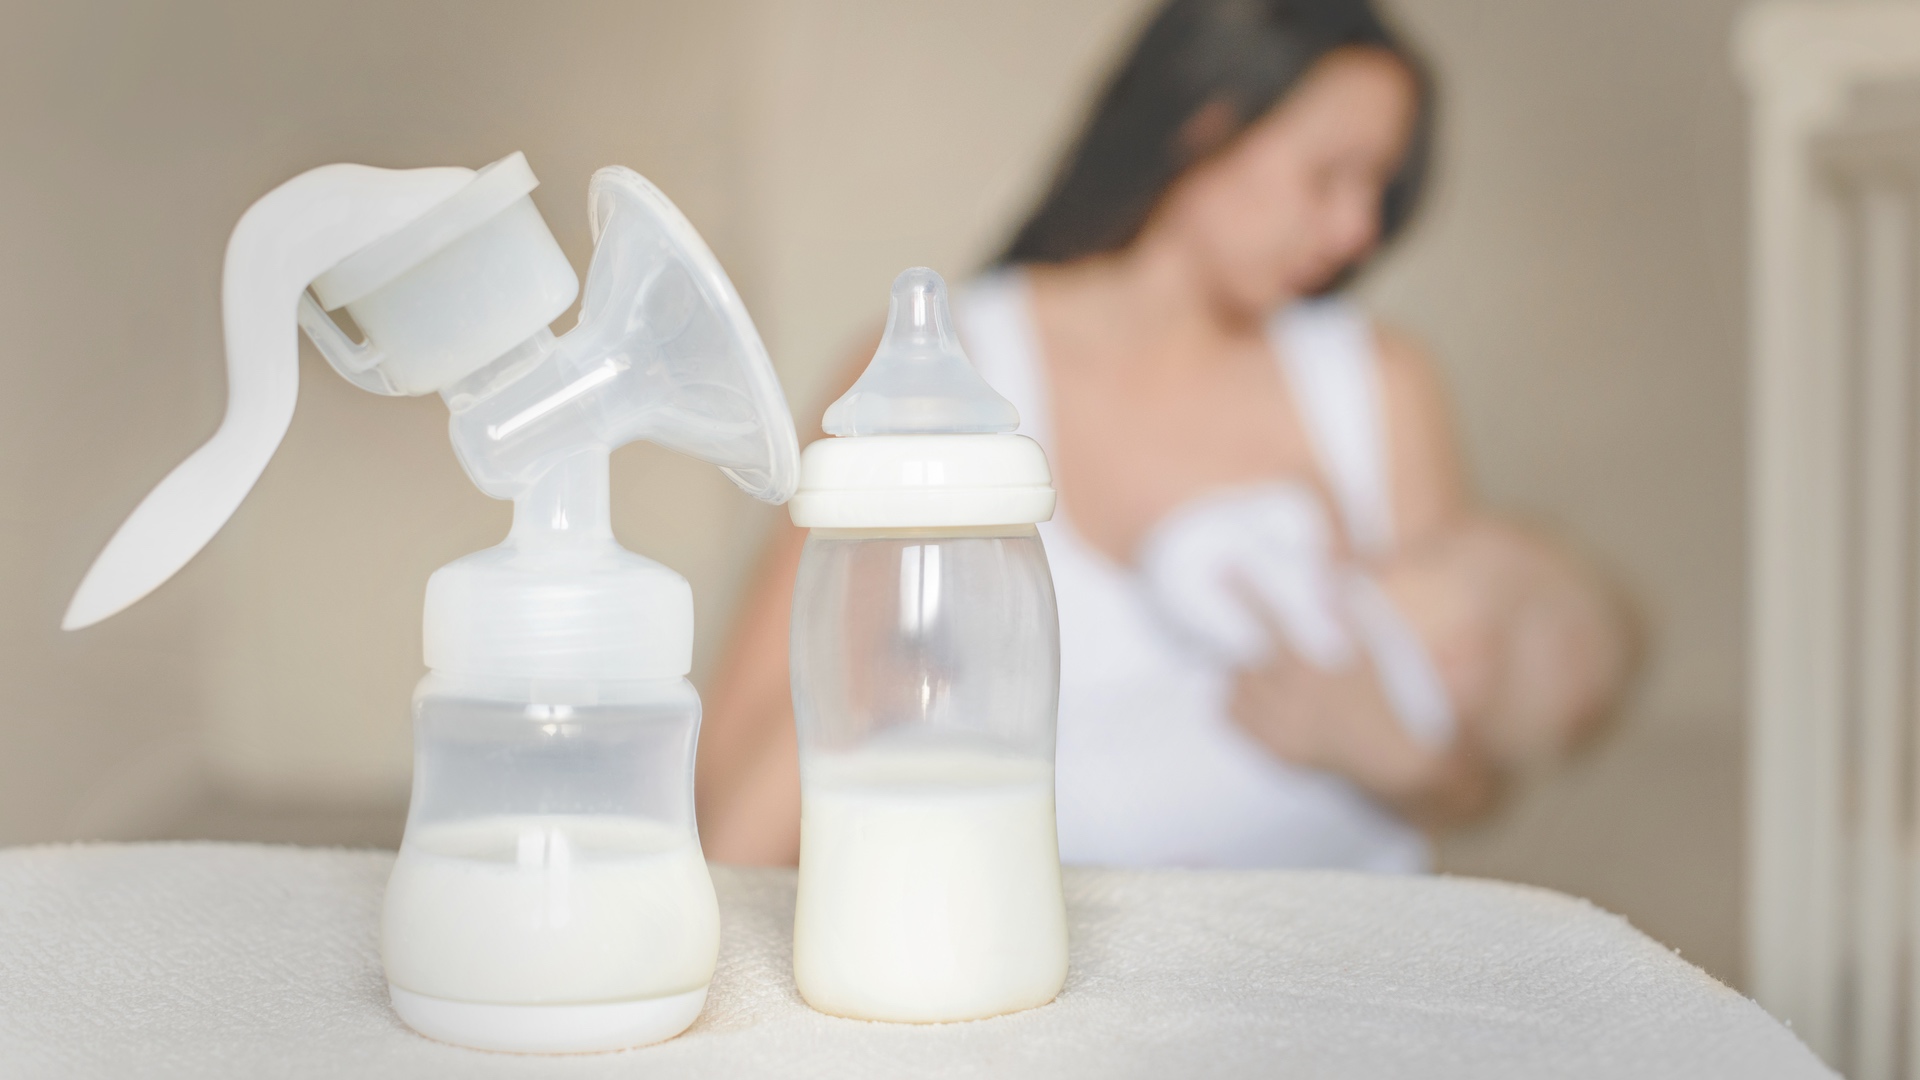 https://www.mamanatural.com/wp-content/uploads/Oversupply-Tips-for-Engorgement-and-Making-Too-Much-Milk-by-Mama-Natural-1.jpg